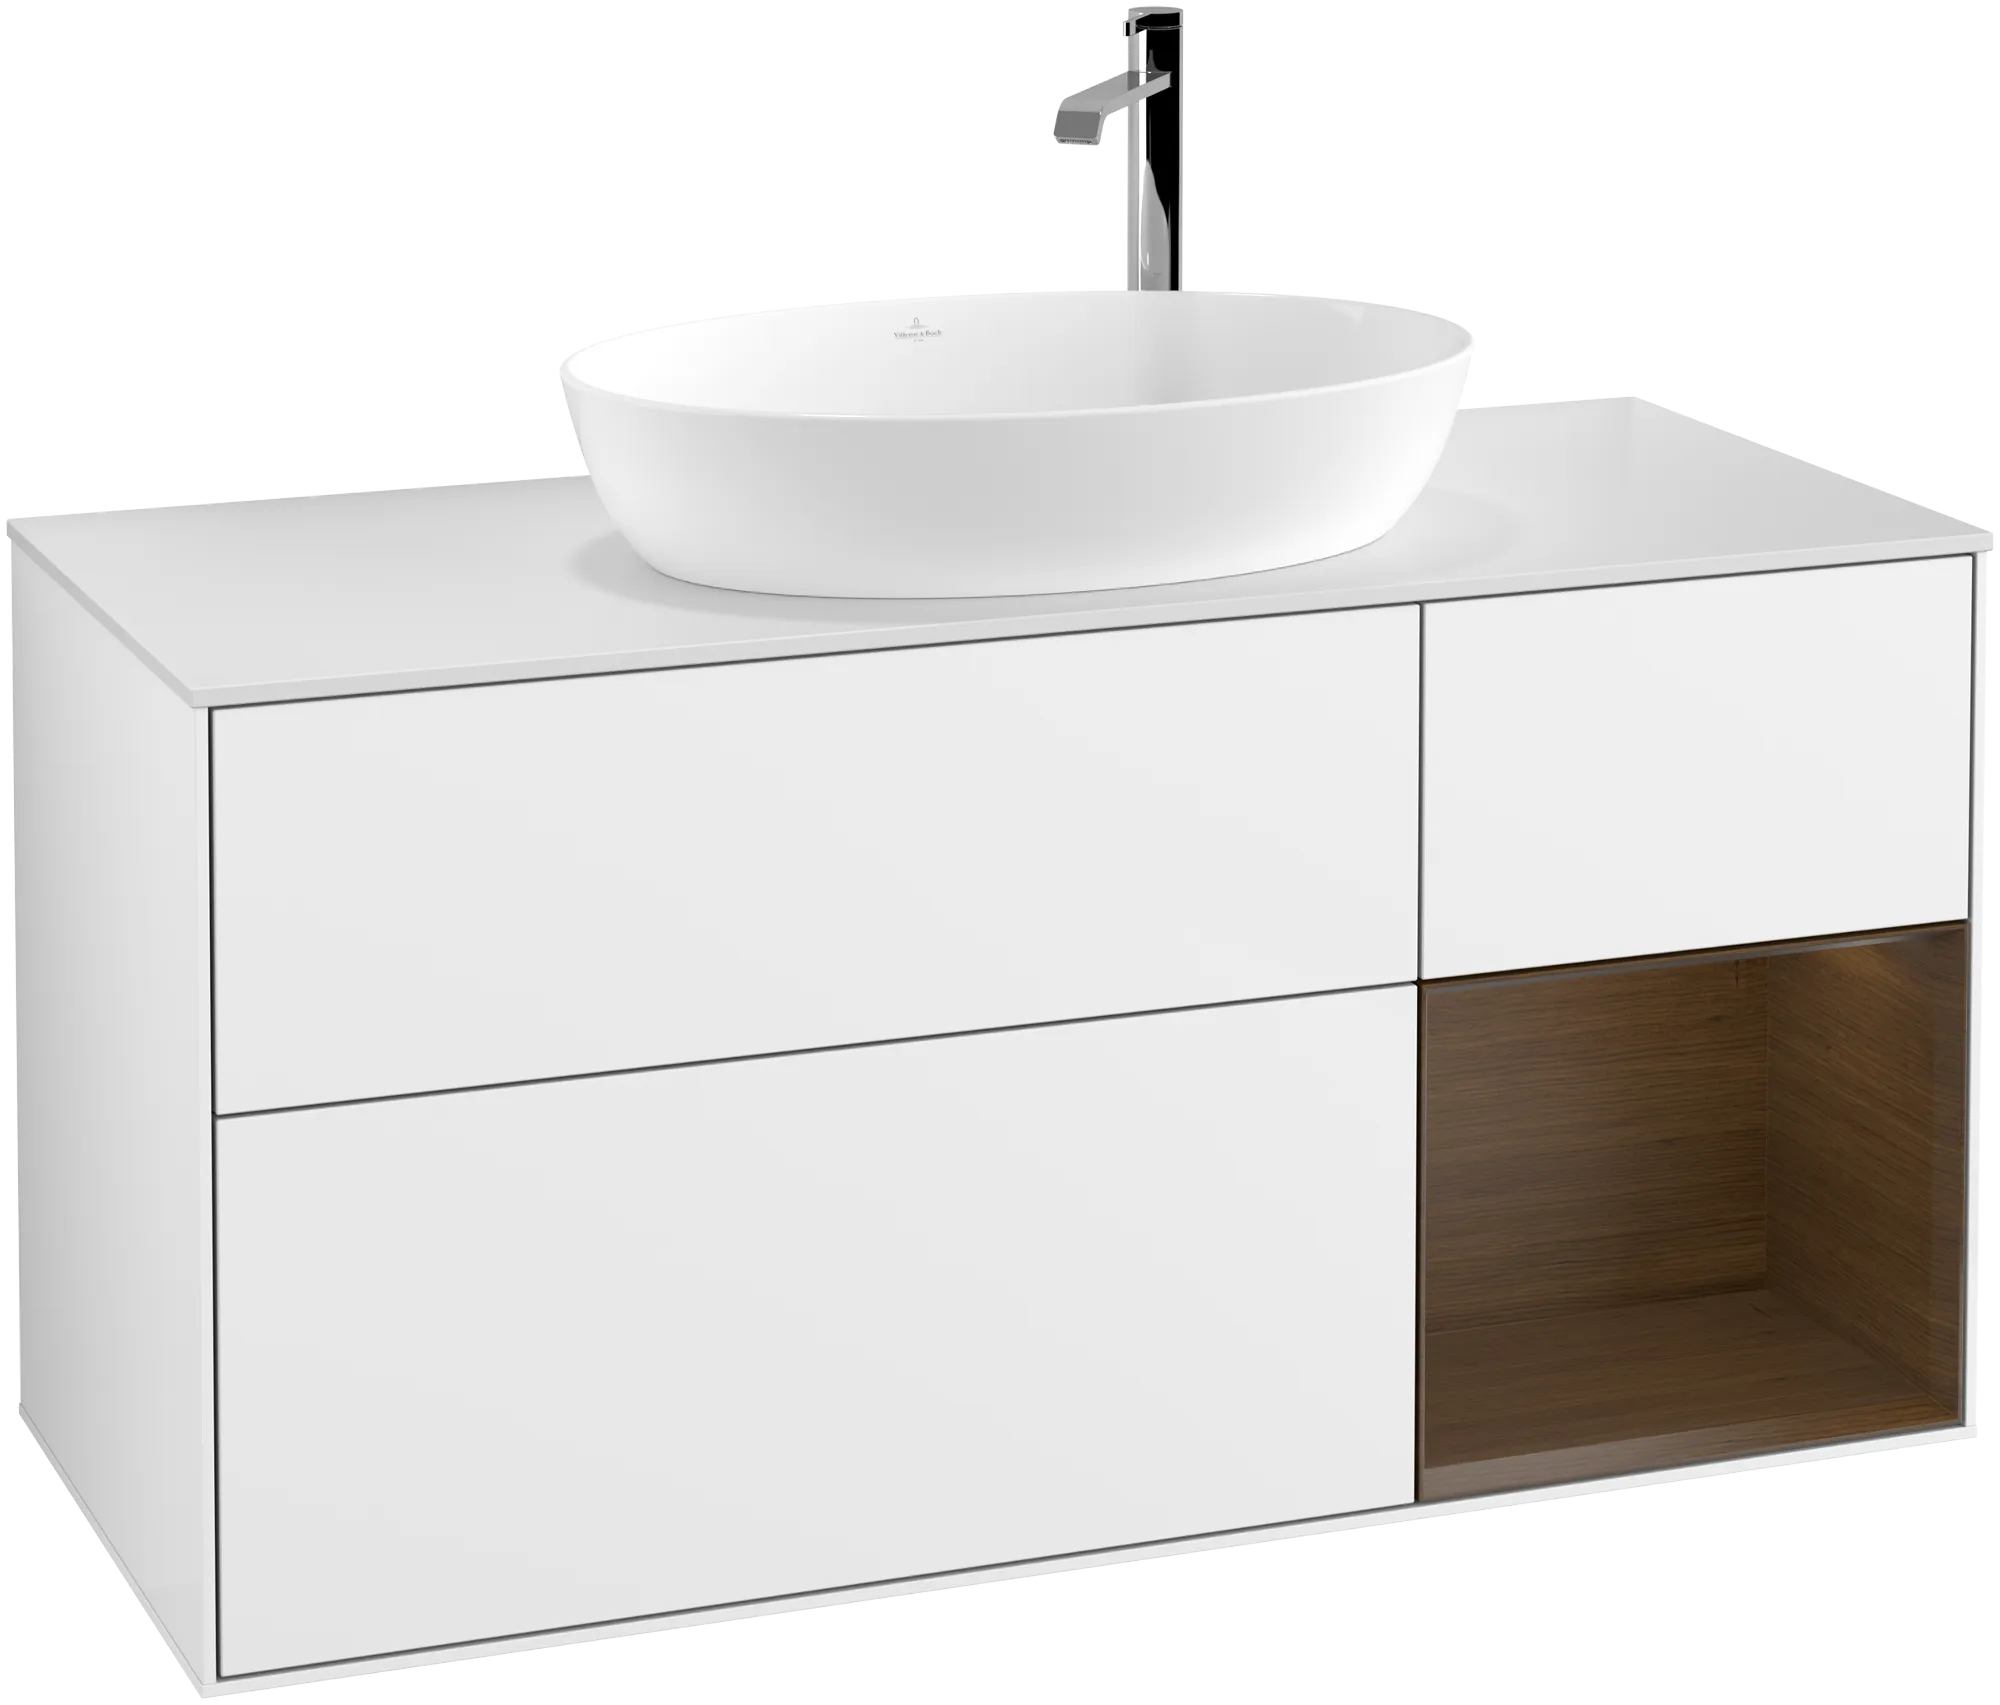 VILLEROY BOCH Finion Vanity unit, with lighting, 3 pull-out compartments, 1200 x 603 x 501 mm, Glossy White Lacquer / Walnut Veneer / Glass White Matt #G951GNGF resmi